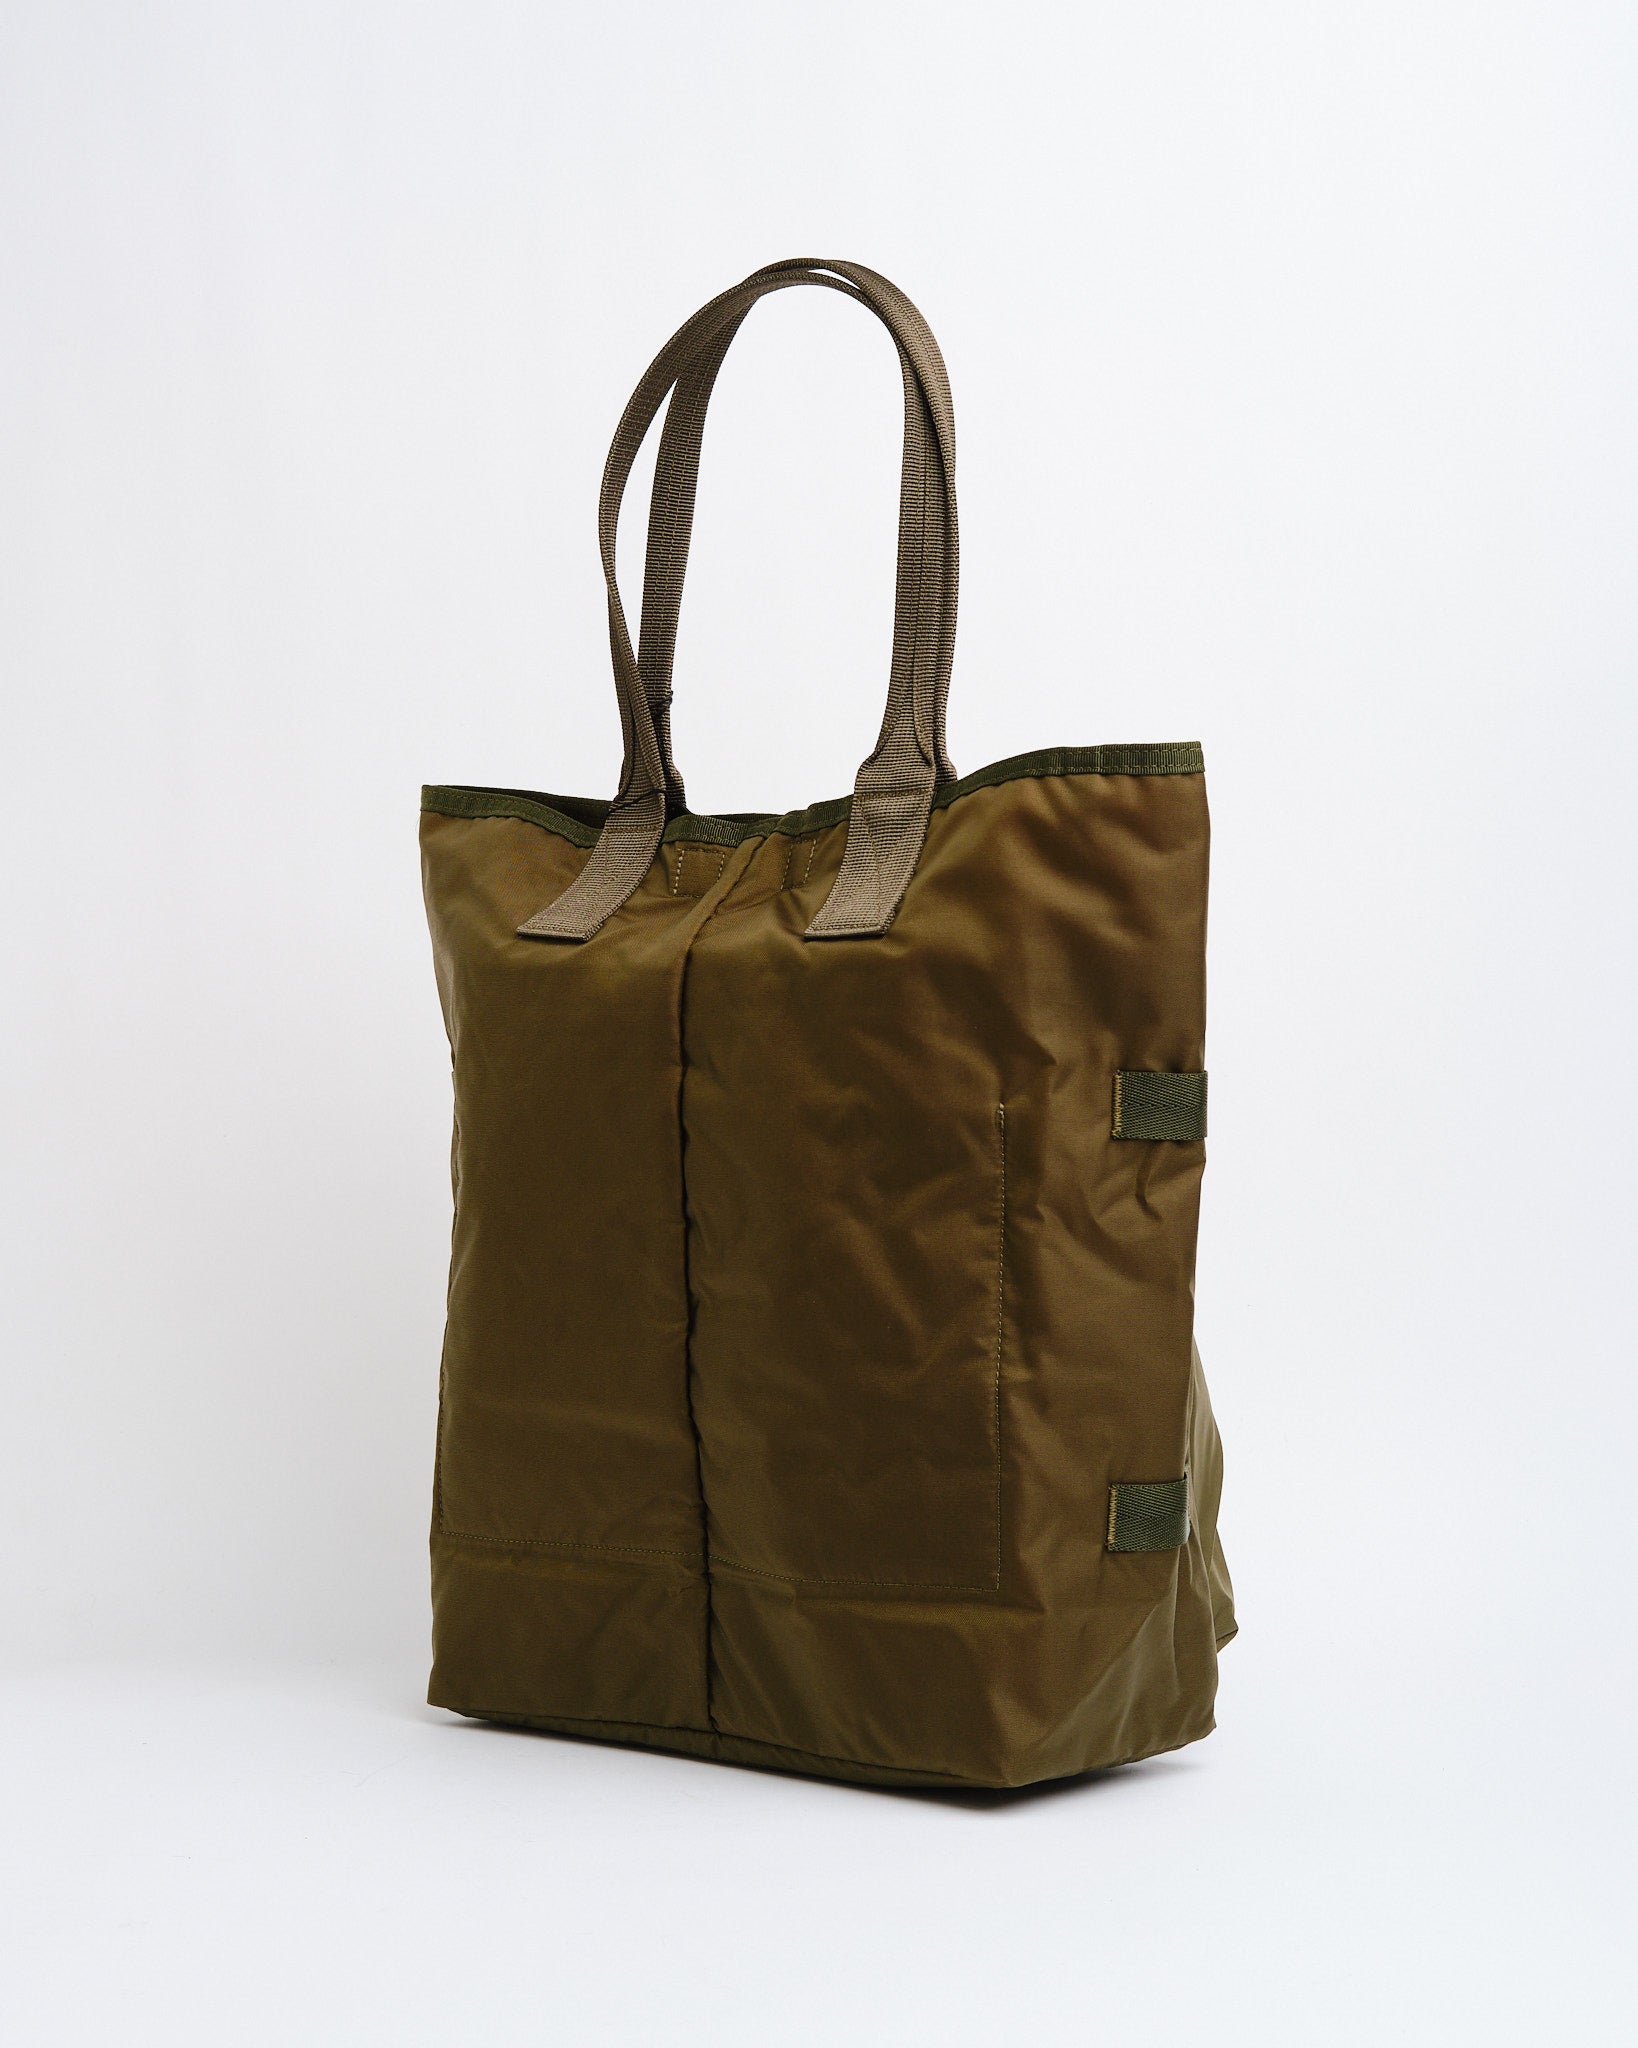 PORTER FORCE TOTE BAG OLIVE DRAB - Meadow